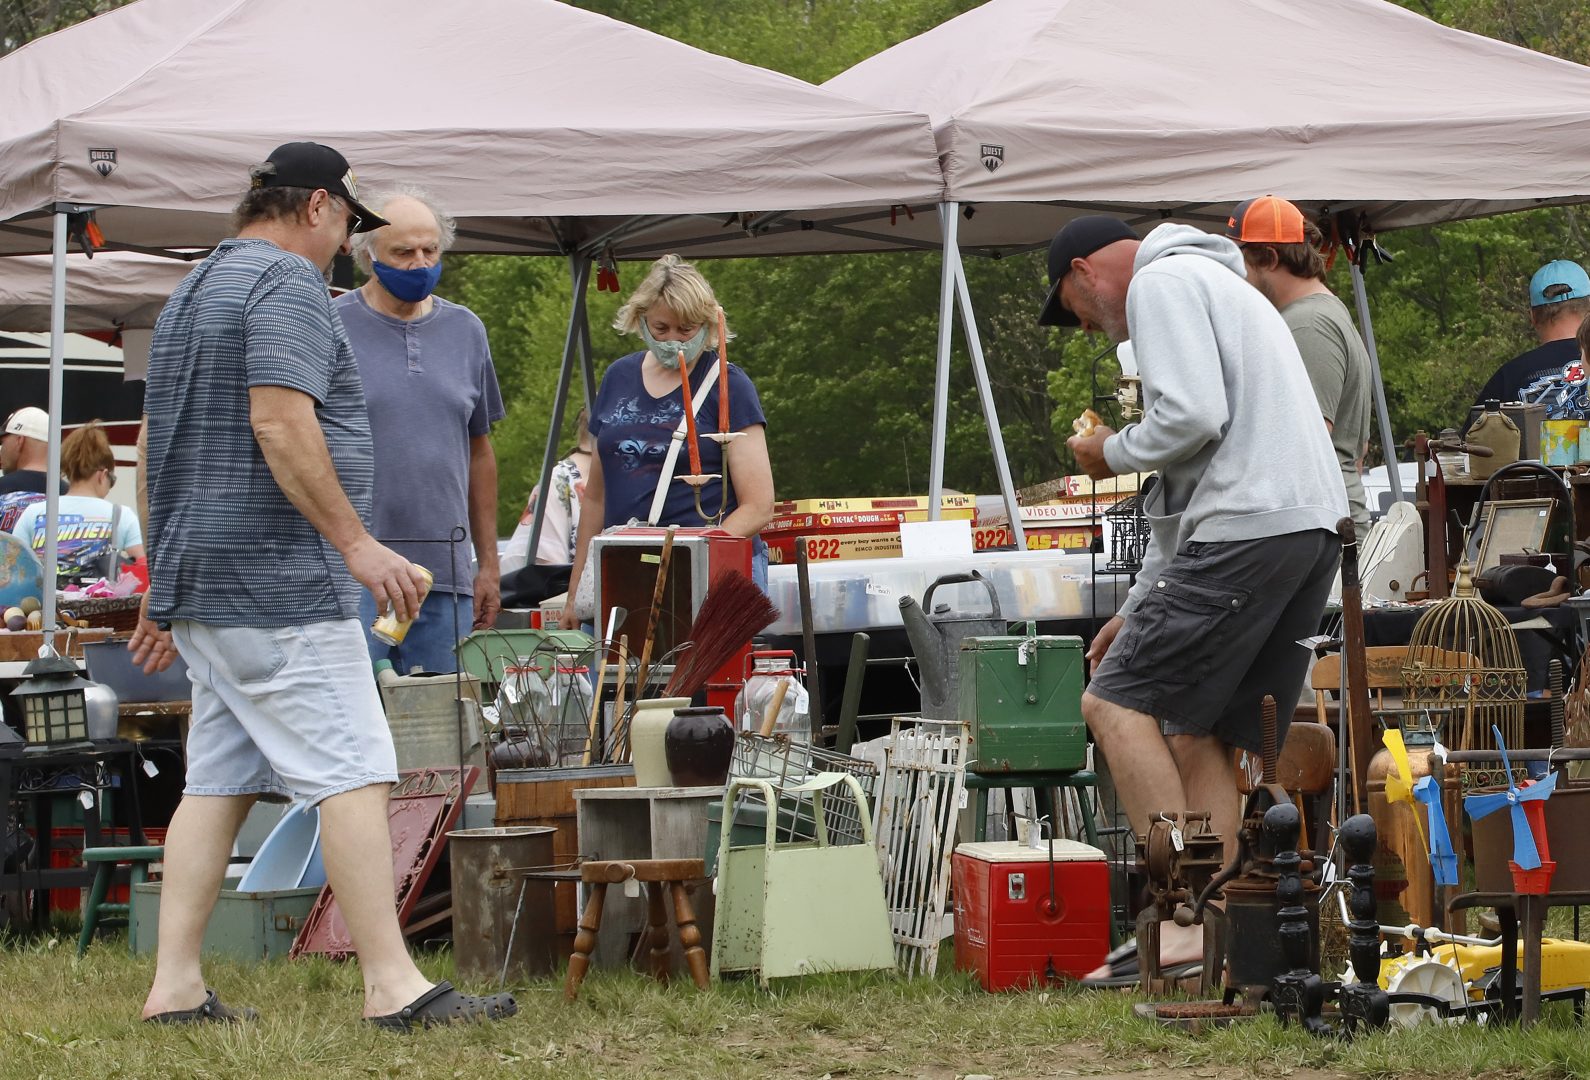 People gather around a vendor's tables at a flea market in Farmington, Pa., on Sunday, May 24, 2020. 